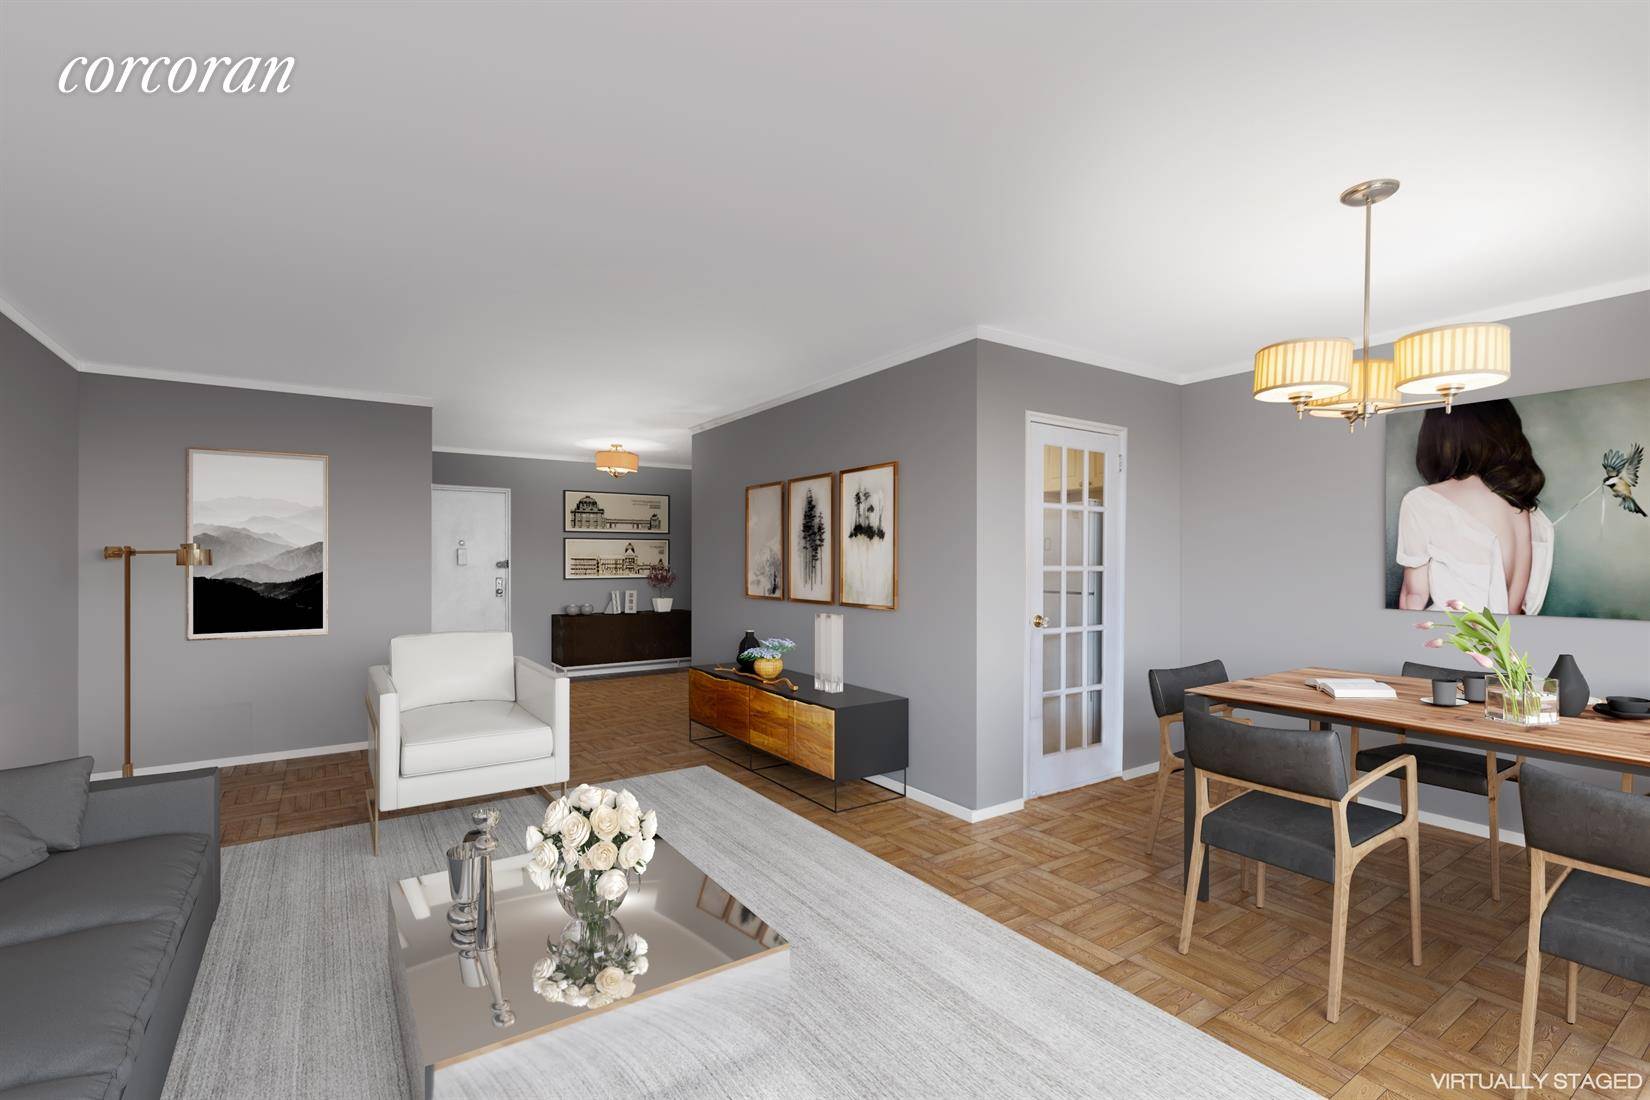 NEW PRICE ! BEST VALUE FOR A SPACIOUS JUNIOR 4, PRIME UPPER EAST SIDE Welcome to 340 East 74th Street Apartment 4G located on a quiet, tree lined street in ...